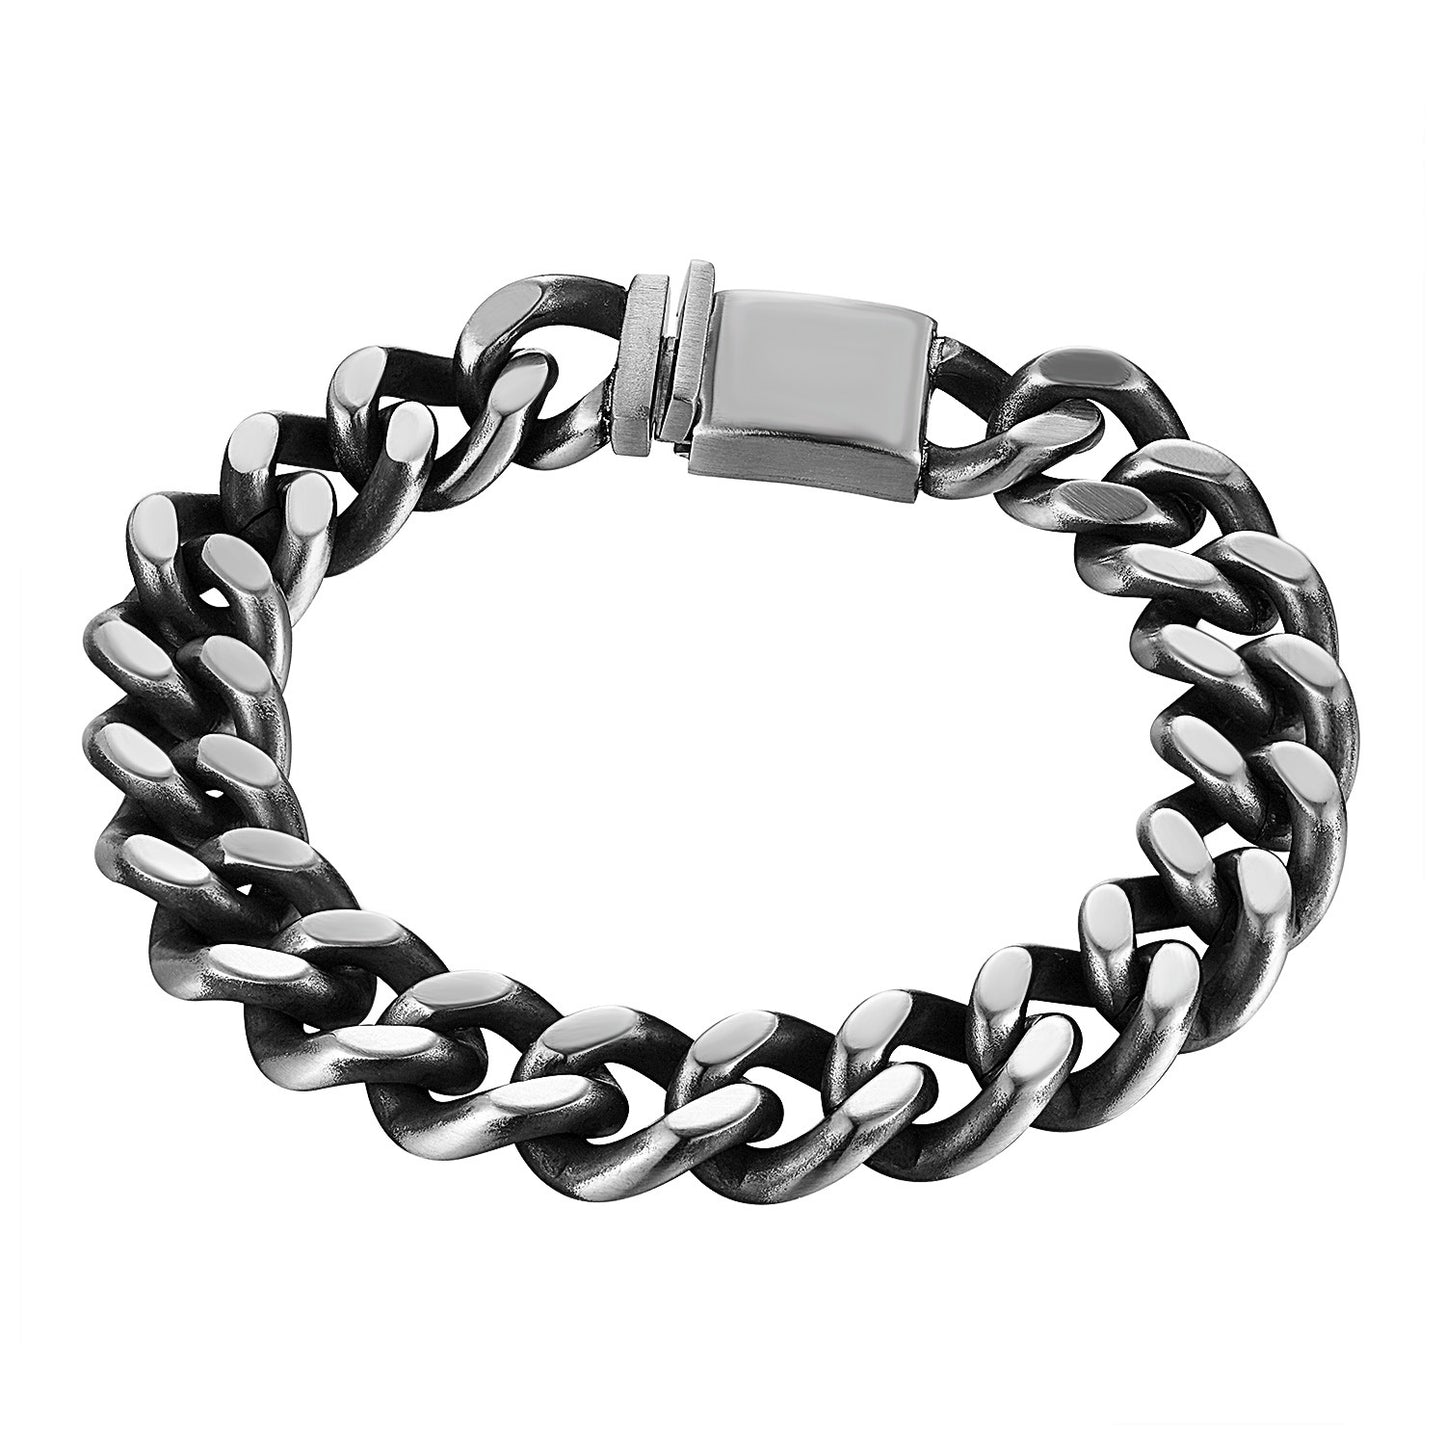 Miami Cuban Link Bracelet Stainless Steel Box Lock Mens 12mm 8.5 Inch Polished